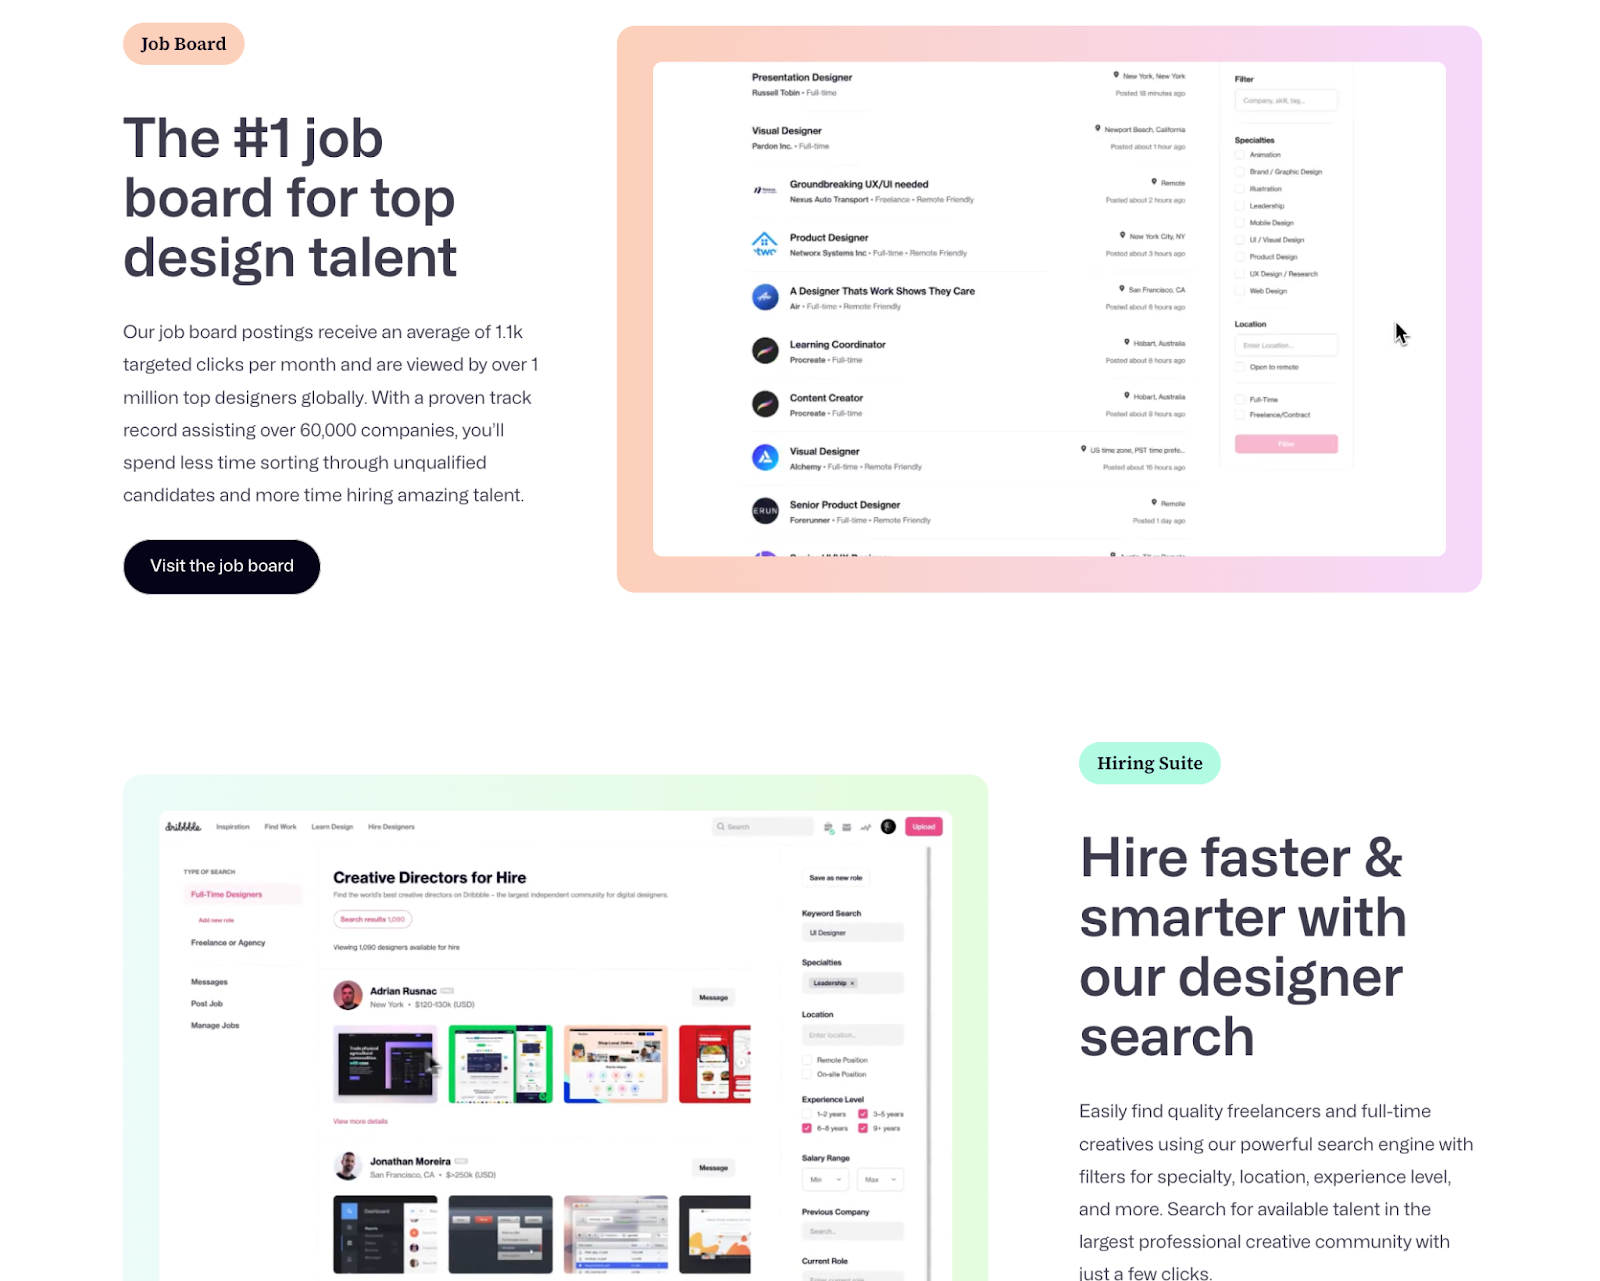 Dribble’s hiring page uses a gradient design to draw visitors’ attentions